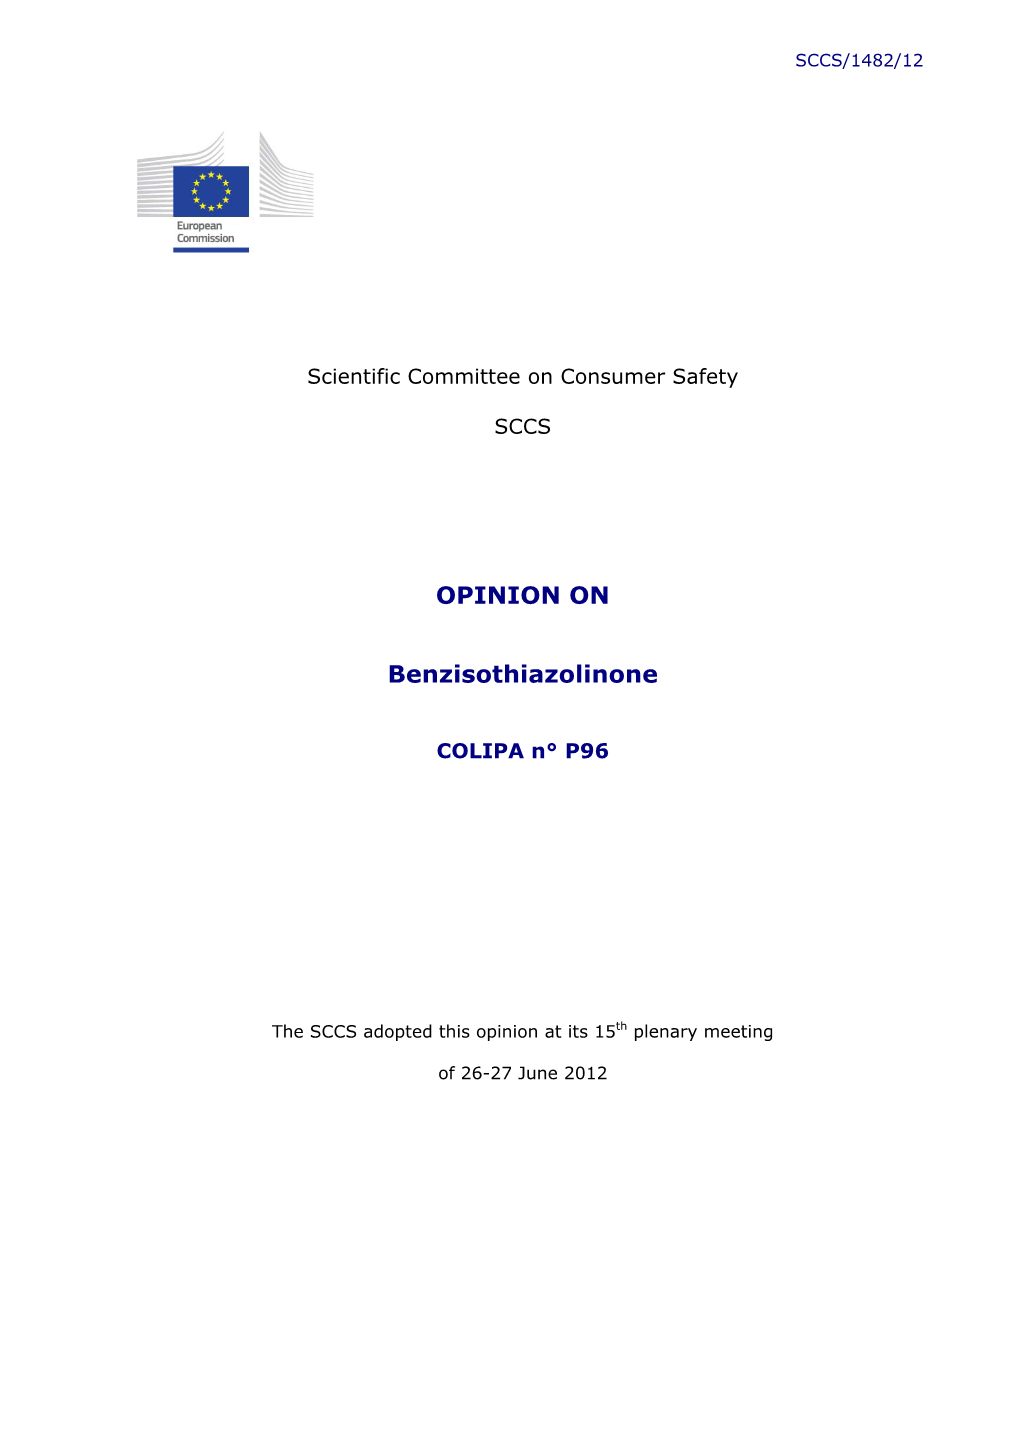 Opinion of the Scientific Committee on Consumer Safety On